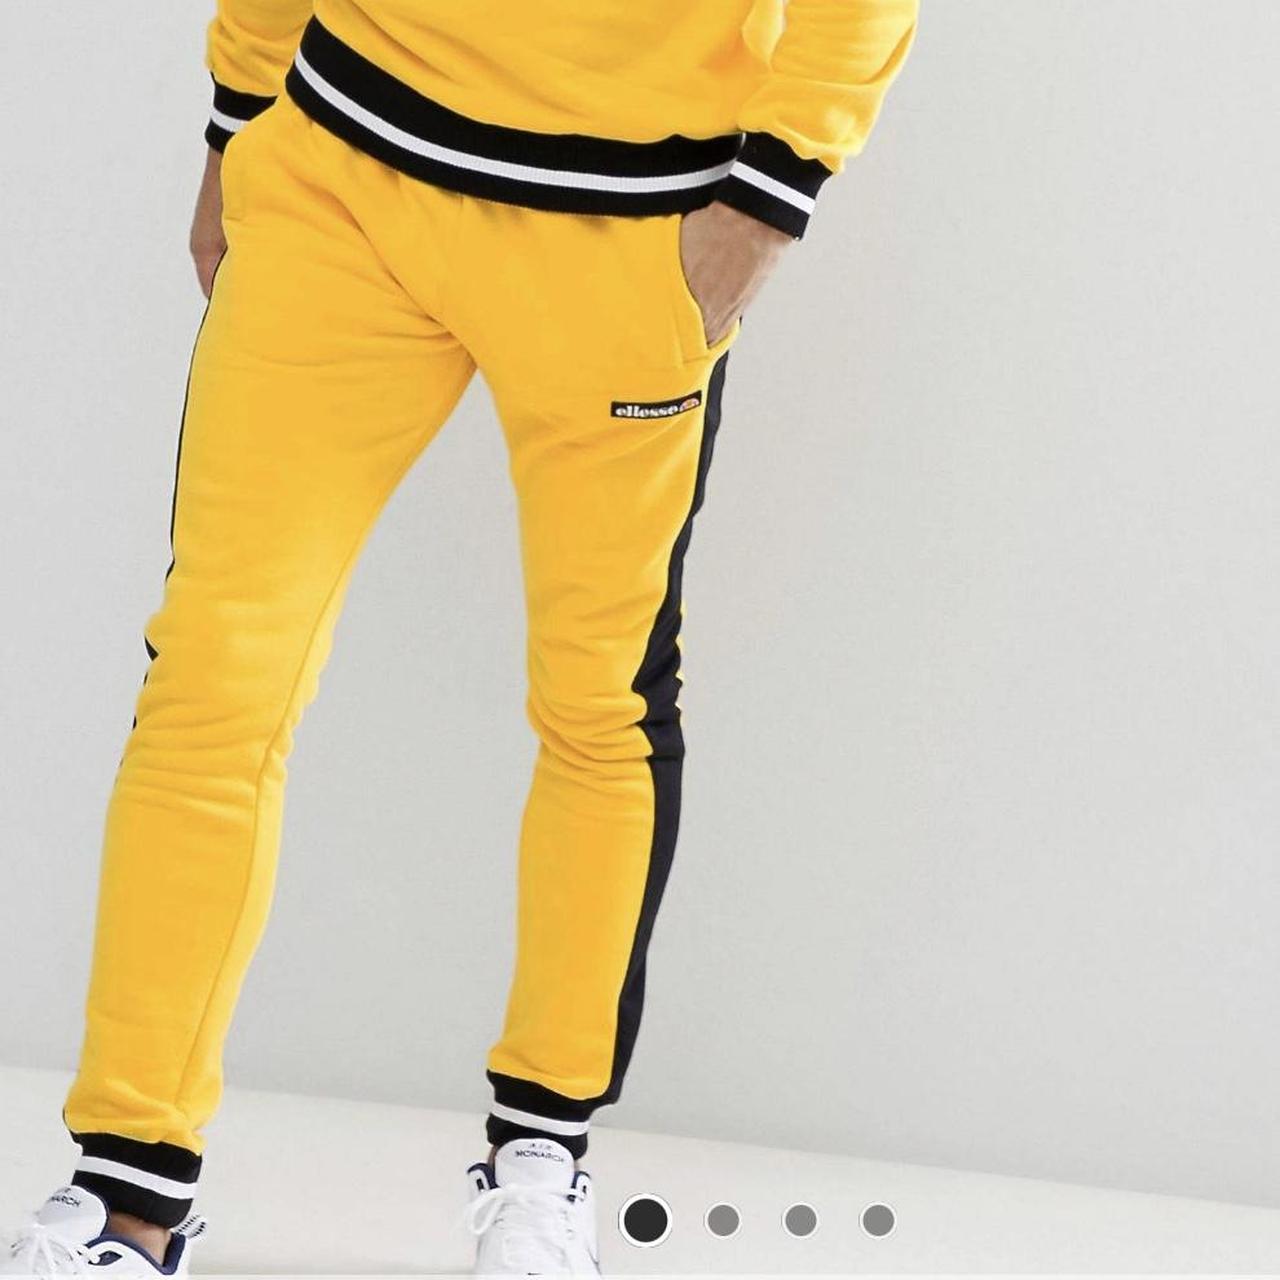 Ellesse Men's Yellow and Black Joggers-tracksuits (5)